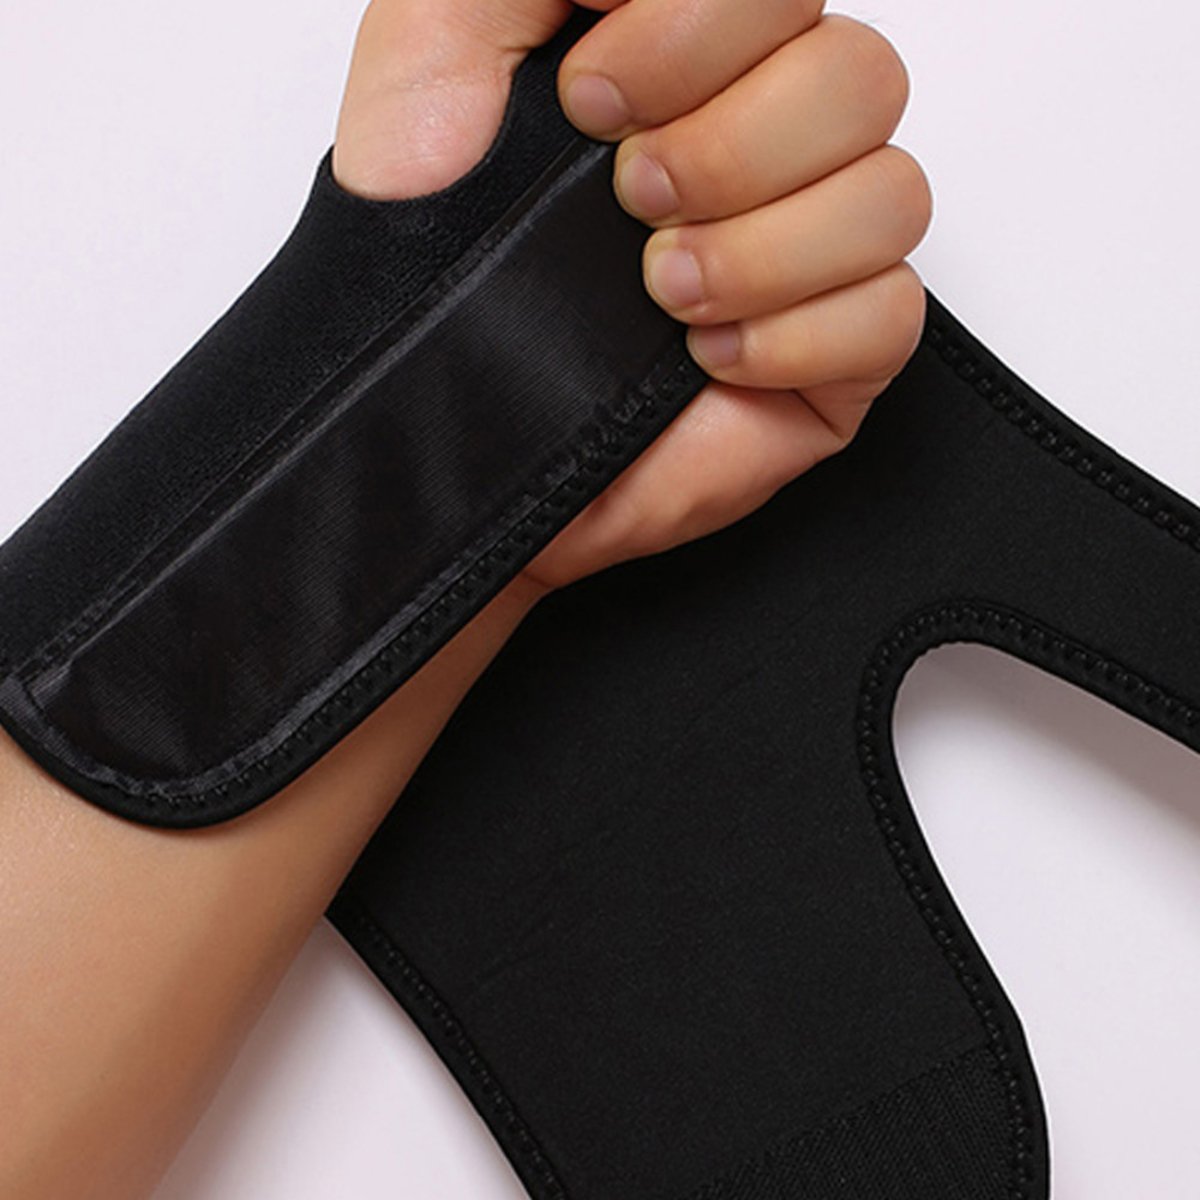 NUCARTURE® Adjustable carpel tunnel wrist support splint wrist thumb support for left hand for men and women brace protector